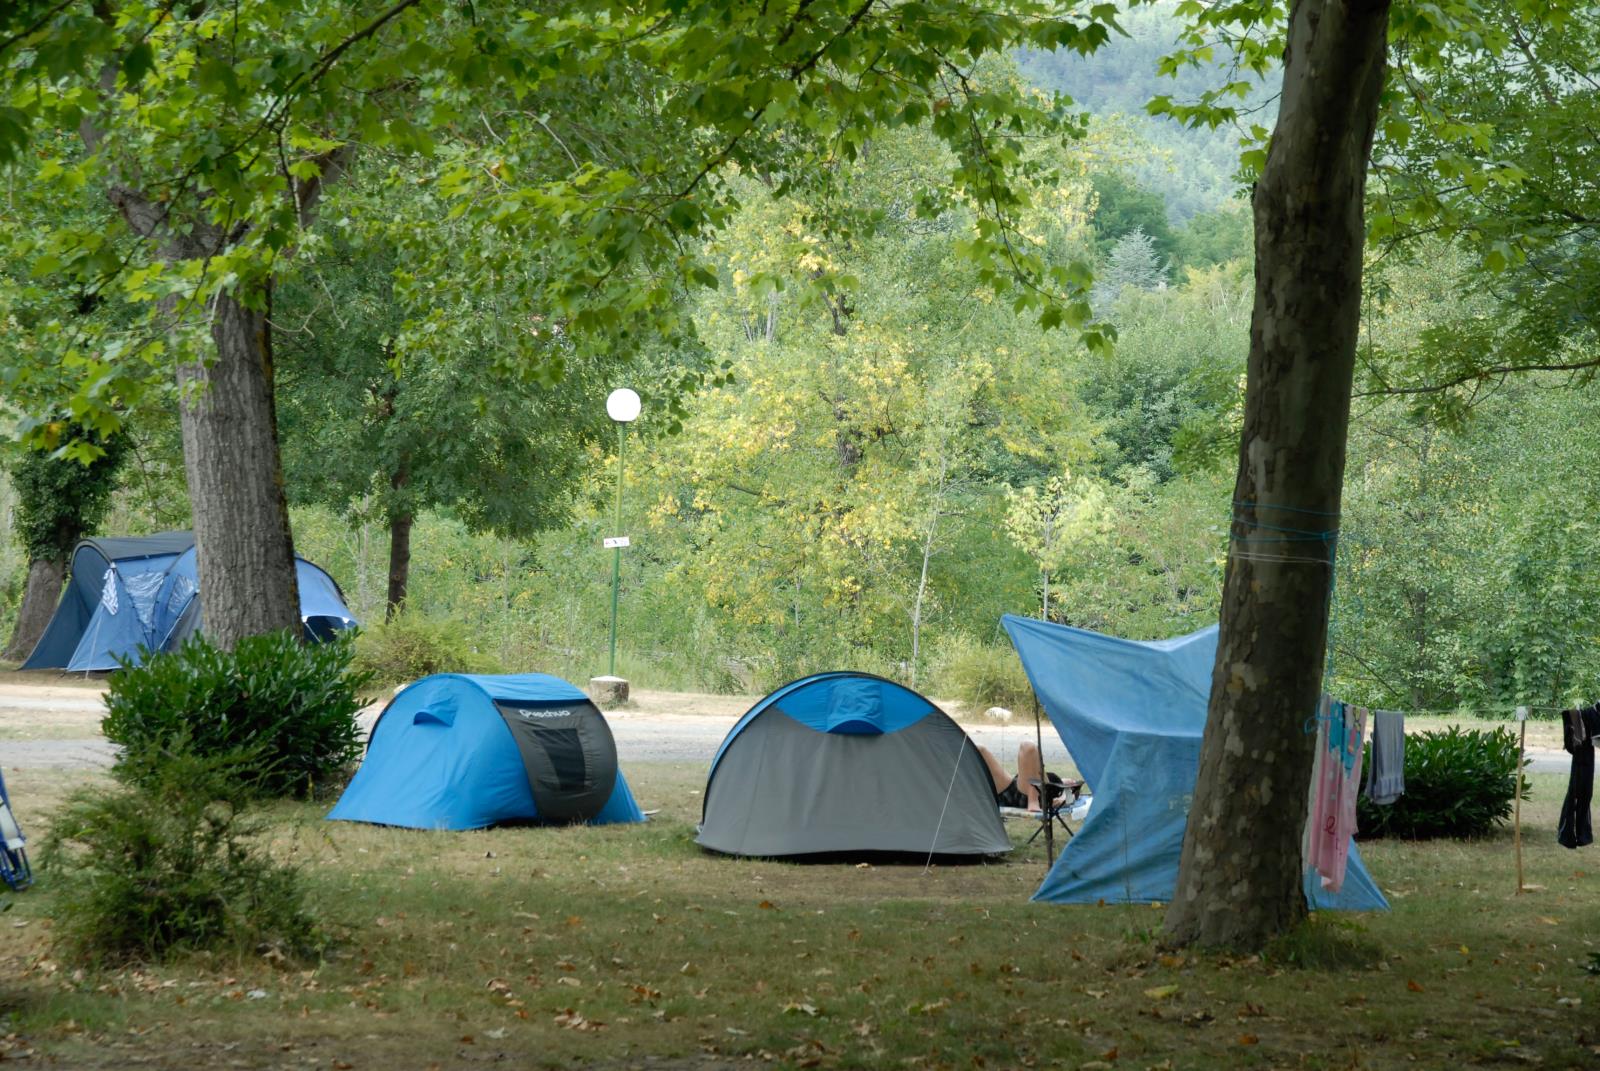 Pitch - Hicker Package ( 1 Person (Walker Or Cyclist), 1 Tent) - Camping Le Pont du Tarn